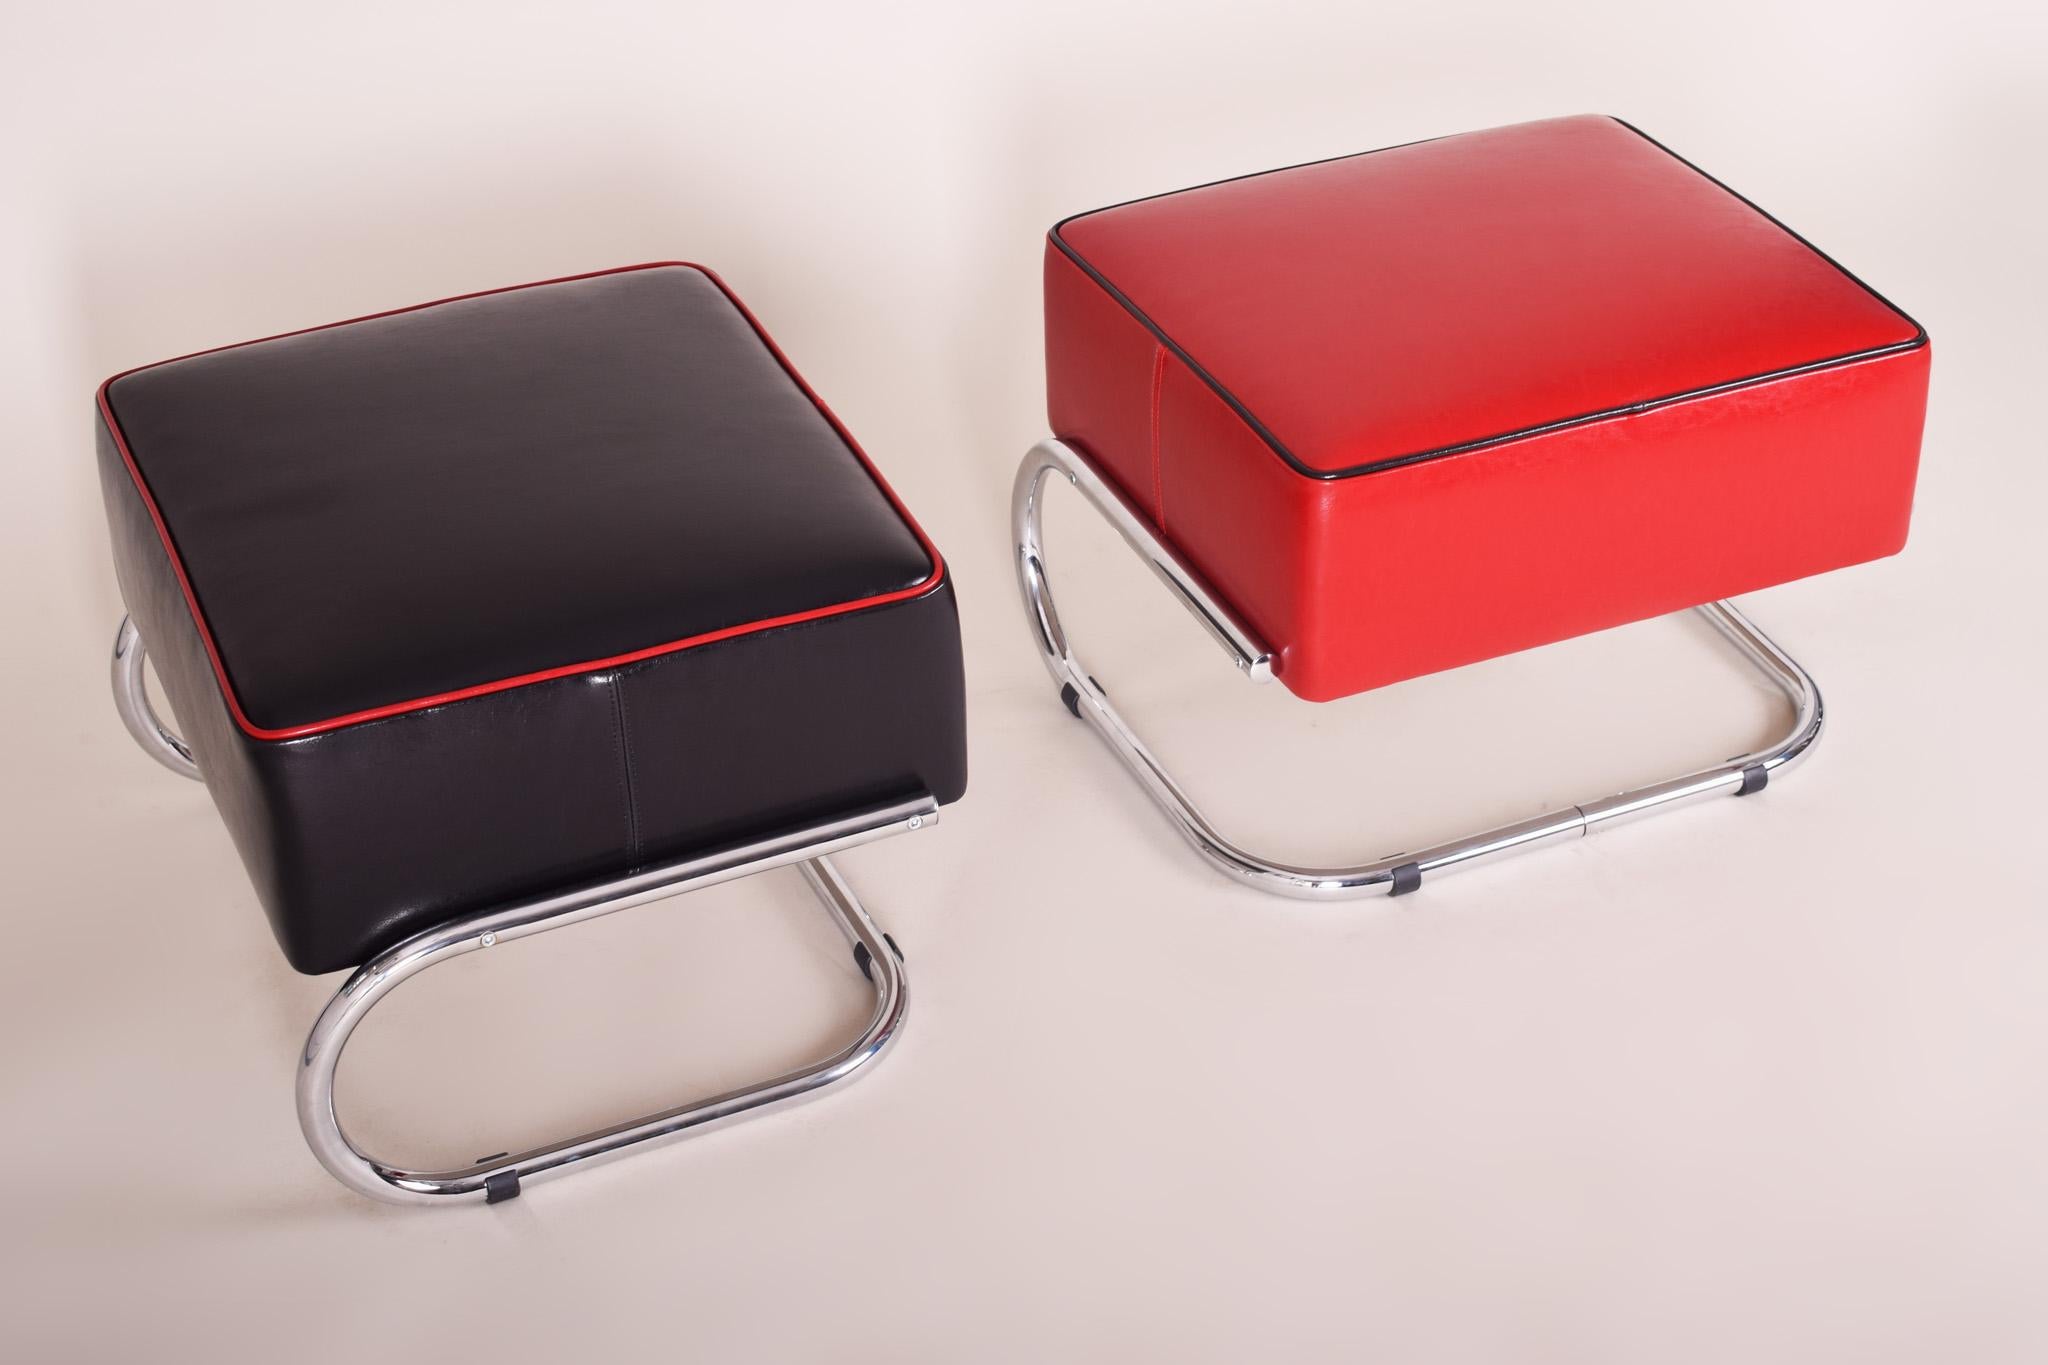 Art Deco Pair of Modernist Tubular Steel Stools, Black and Red Leather, Chrome, 1930-1939 For Sale